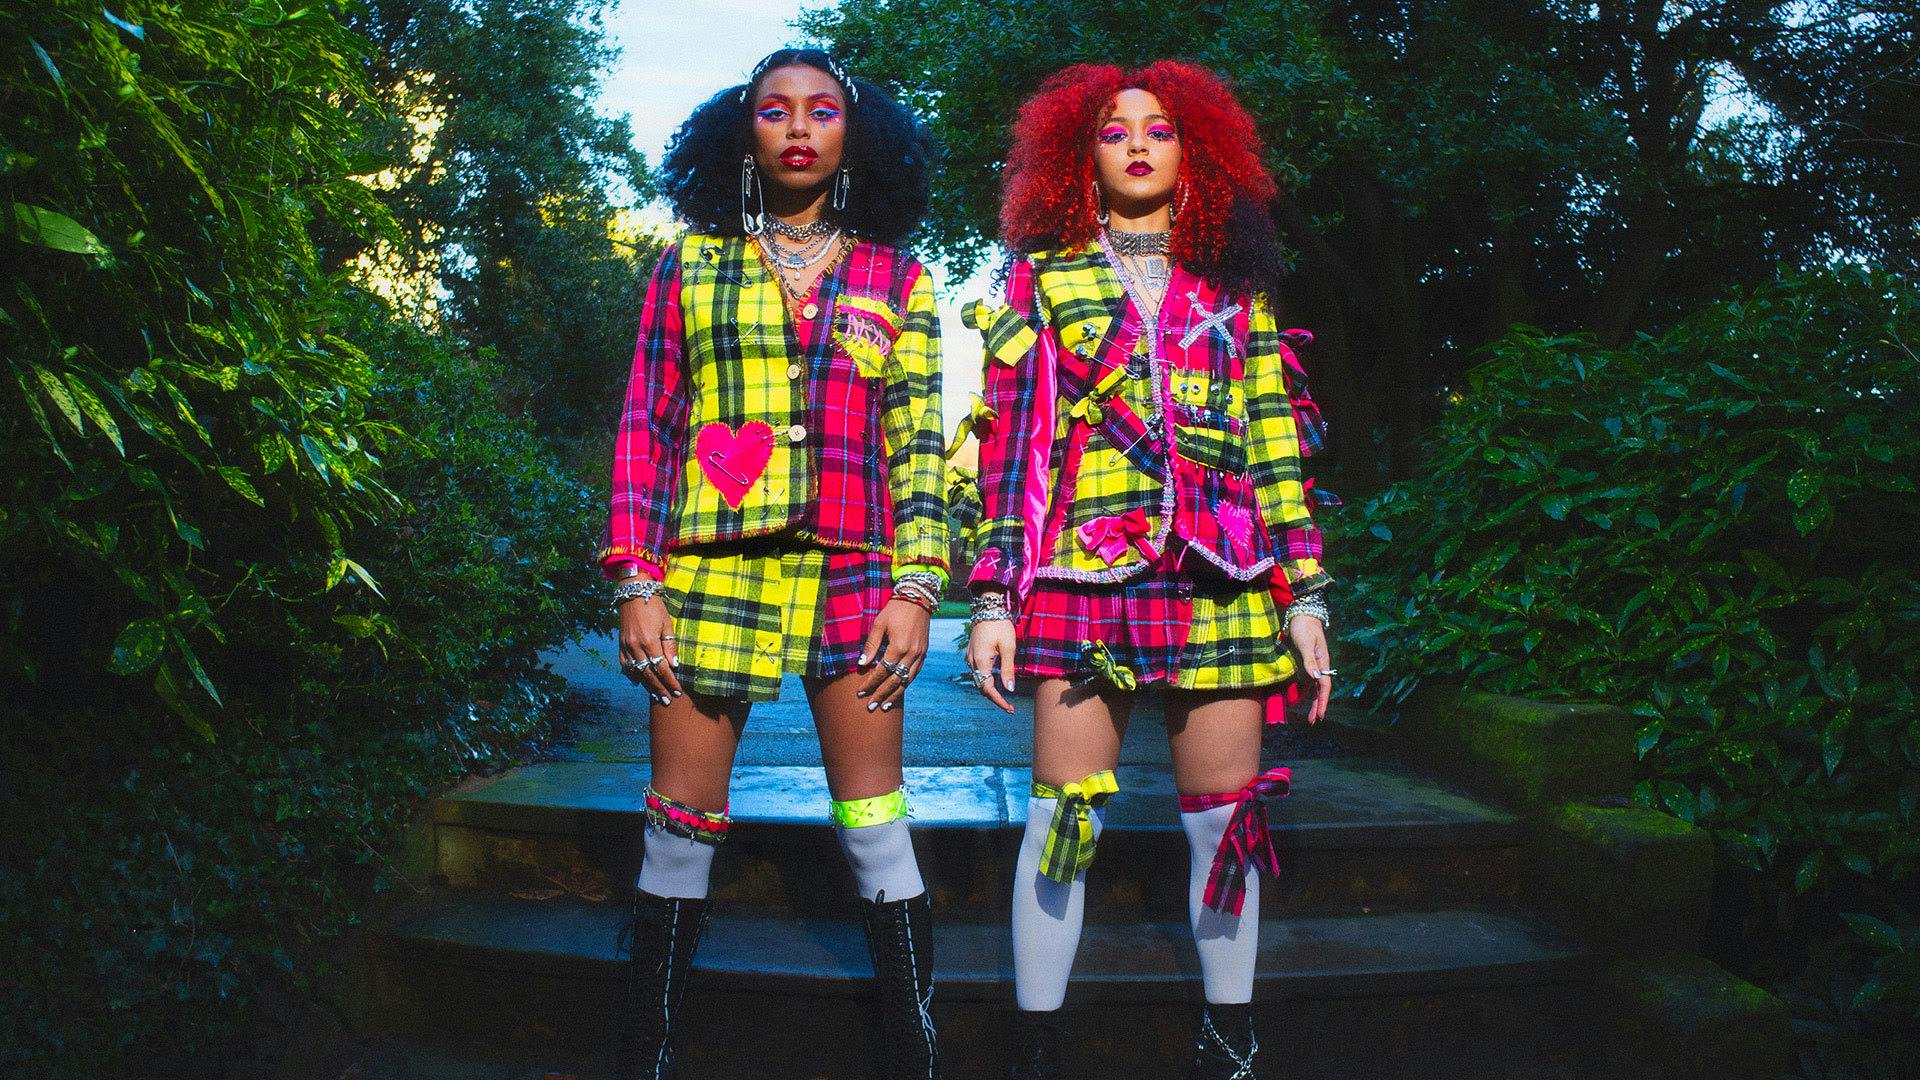 Nova Twins: “We don’t want to follow trends, so we try to push it in a new direction”